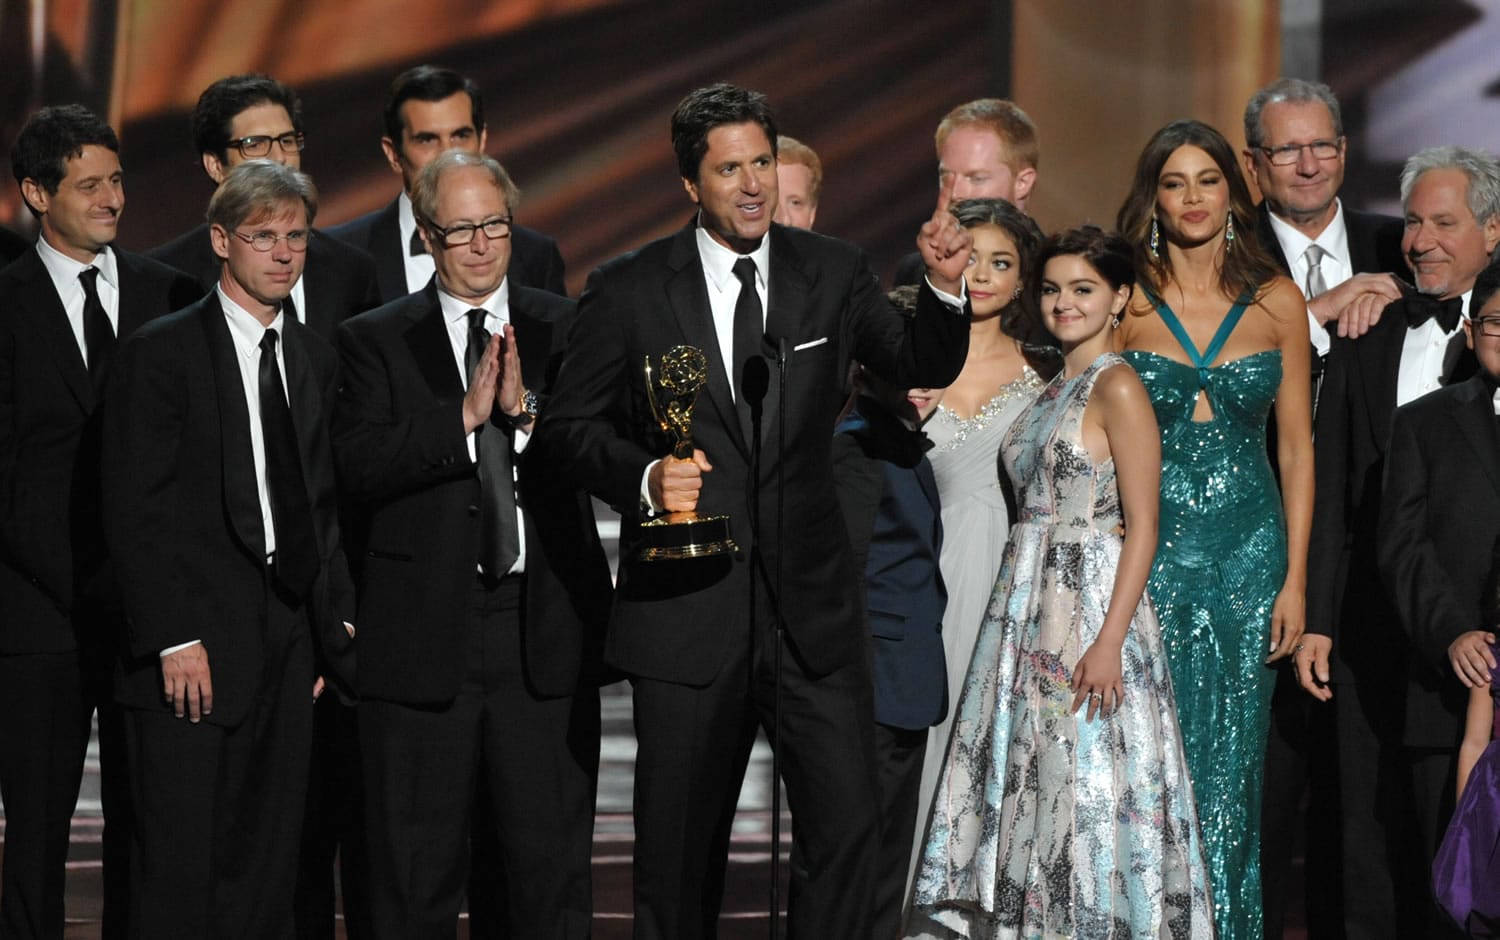 Steven Levitan, center, and the cast and crew of &quot;Modern Family&quot; accept the outstanding comedy series award at the 64th Primetime Emmy Awards at the Nokia Theatre on Sunday, Sept. 23, 2012, in Los Angeles.